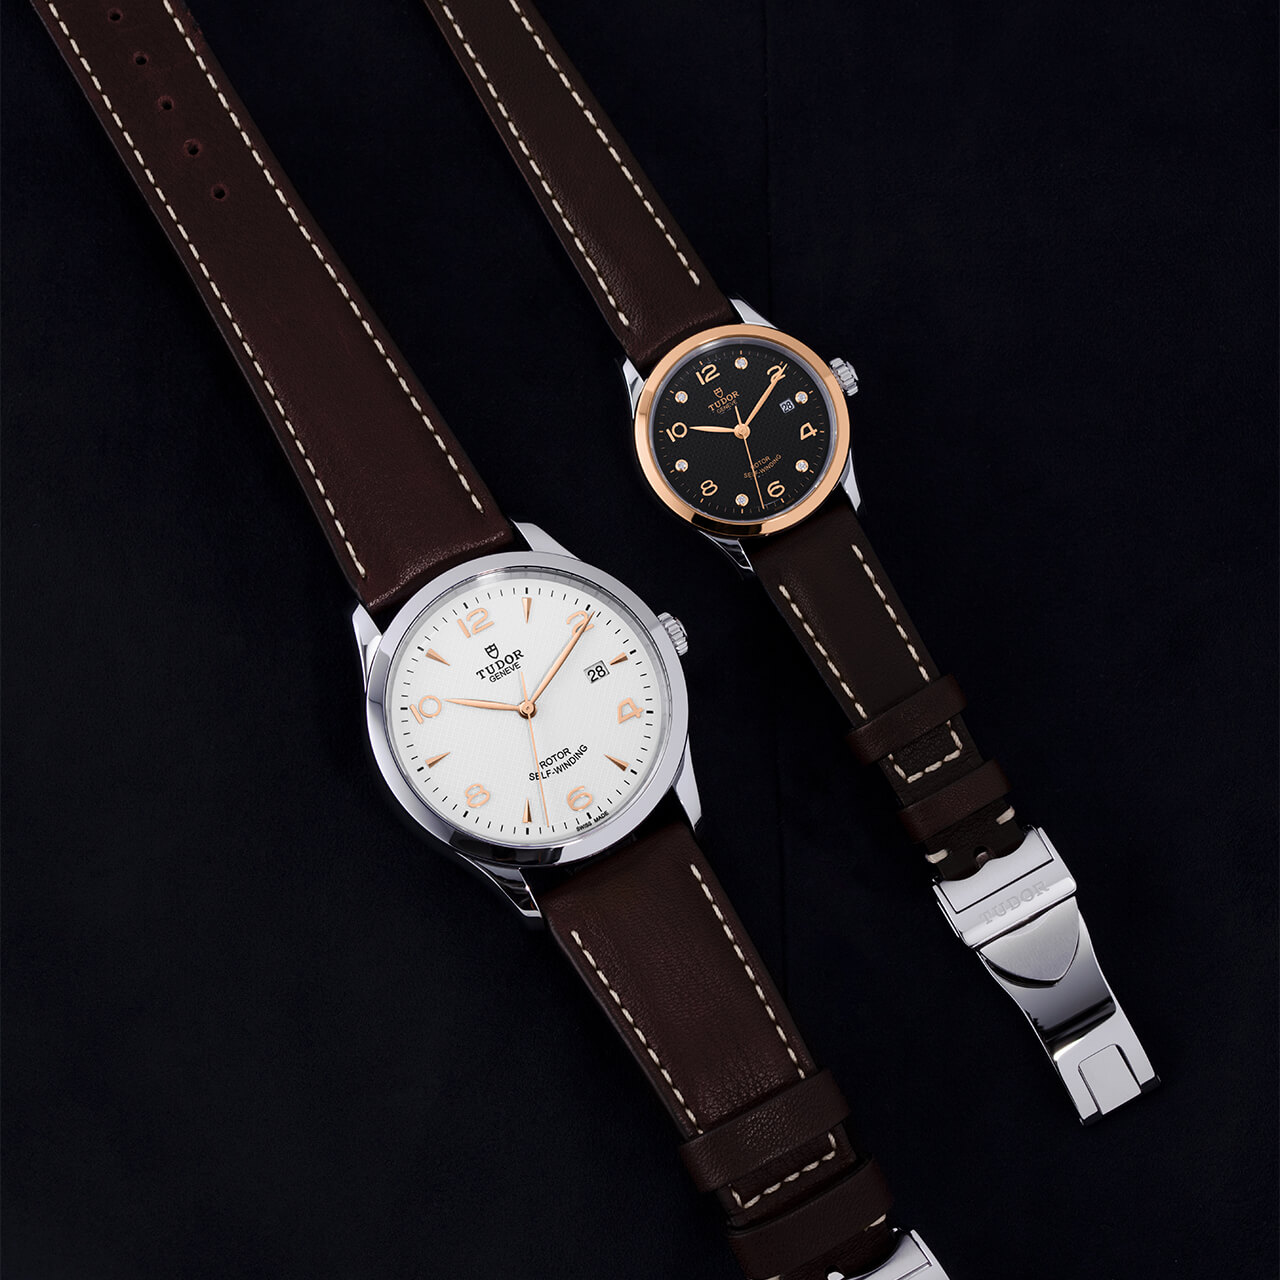 Two M91651-0012 with brown straps on a black background.